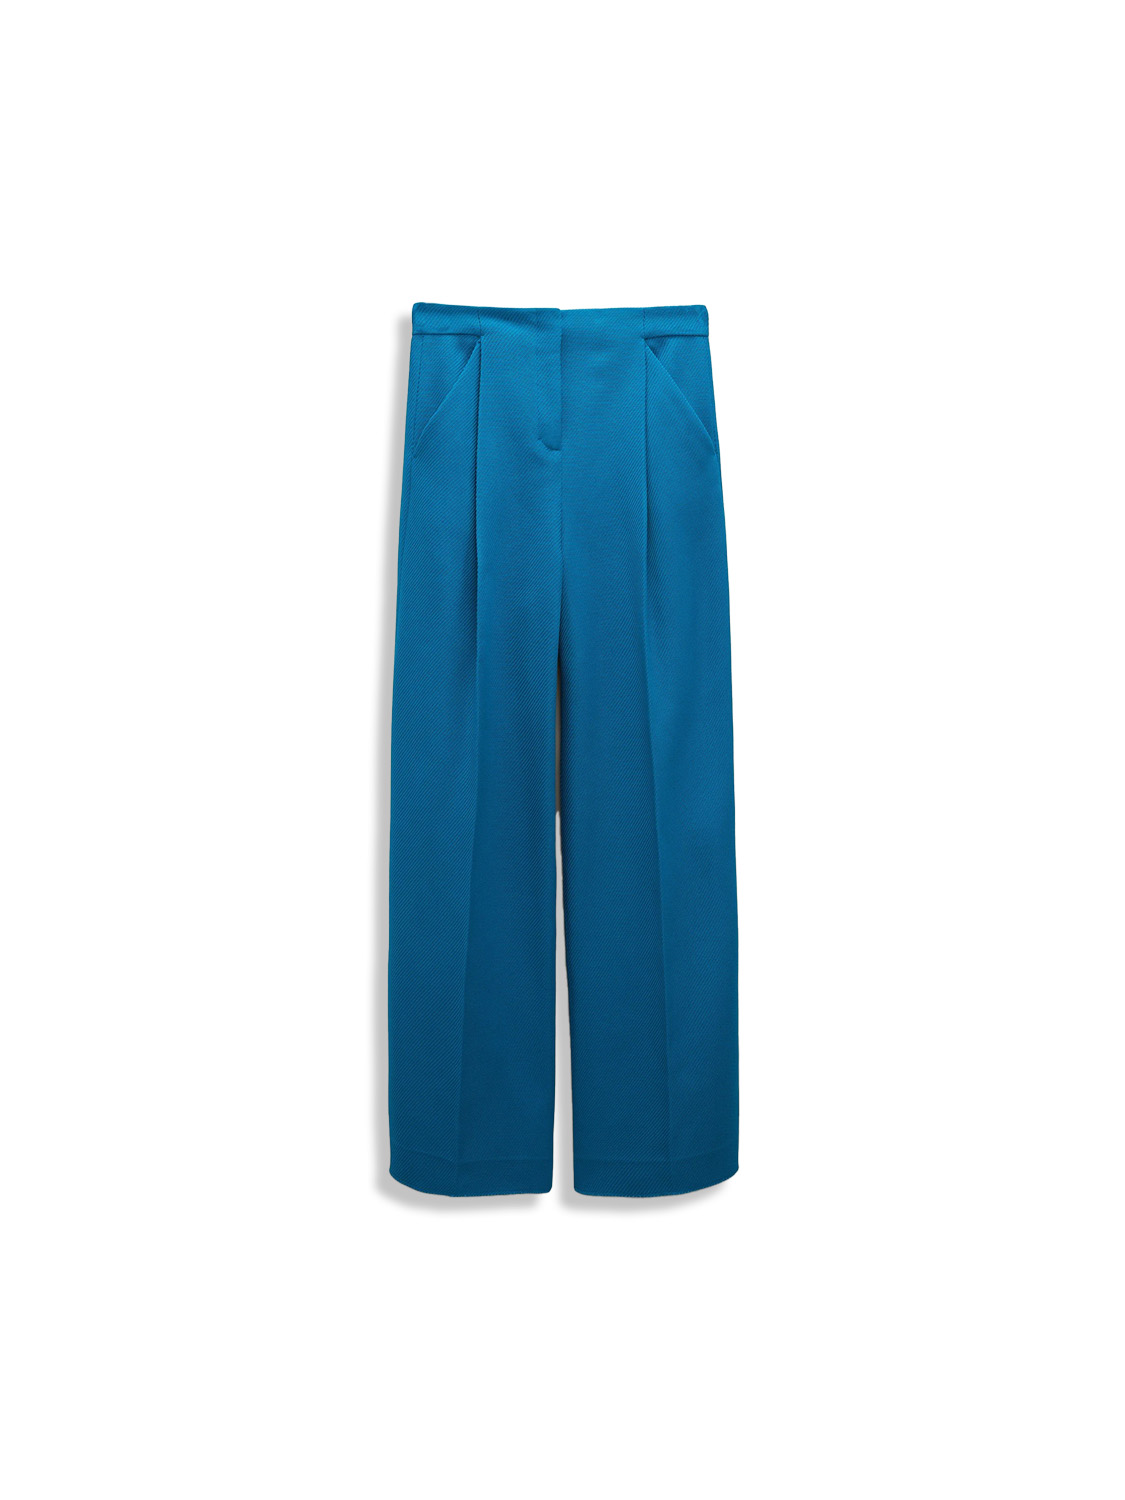 Striking Coolness Pants - Wide pleated pants